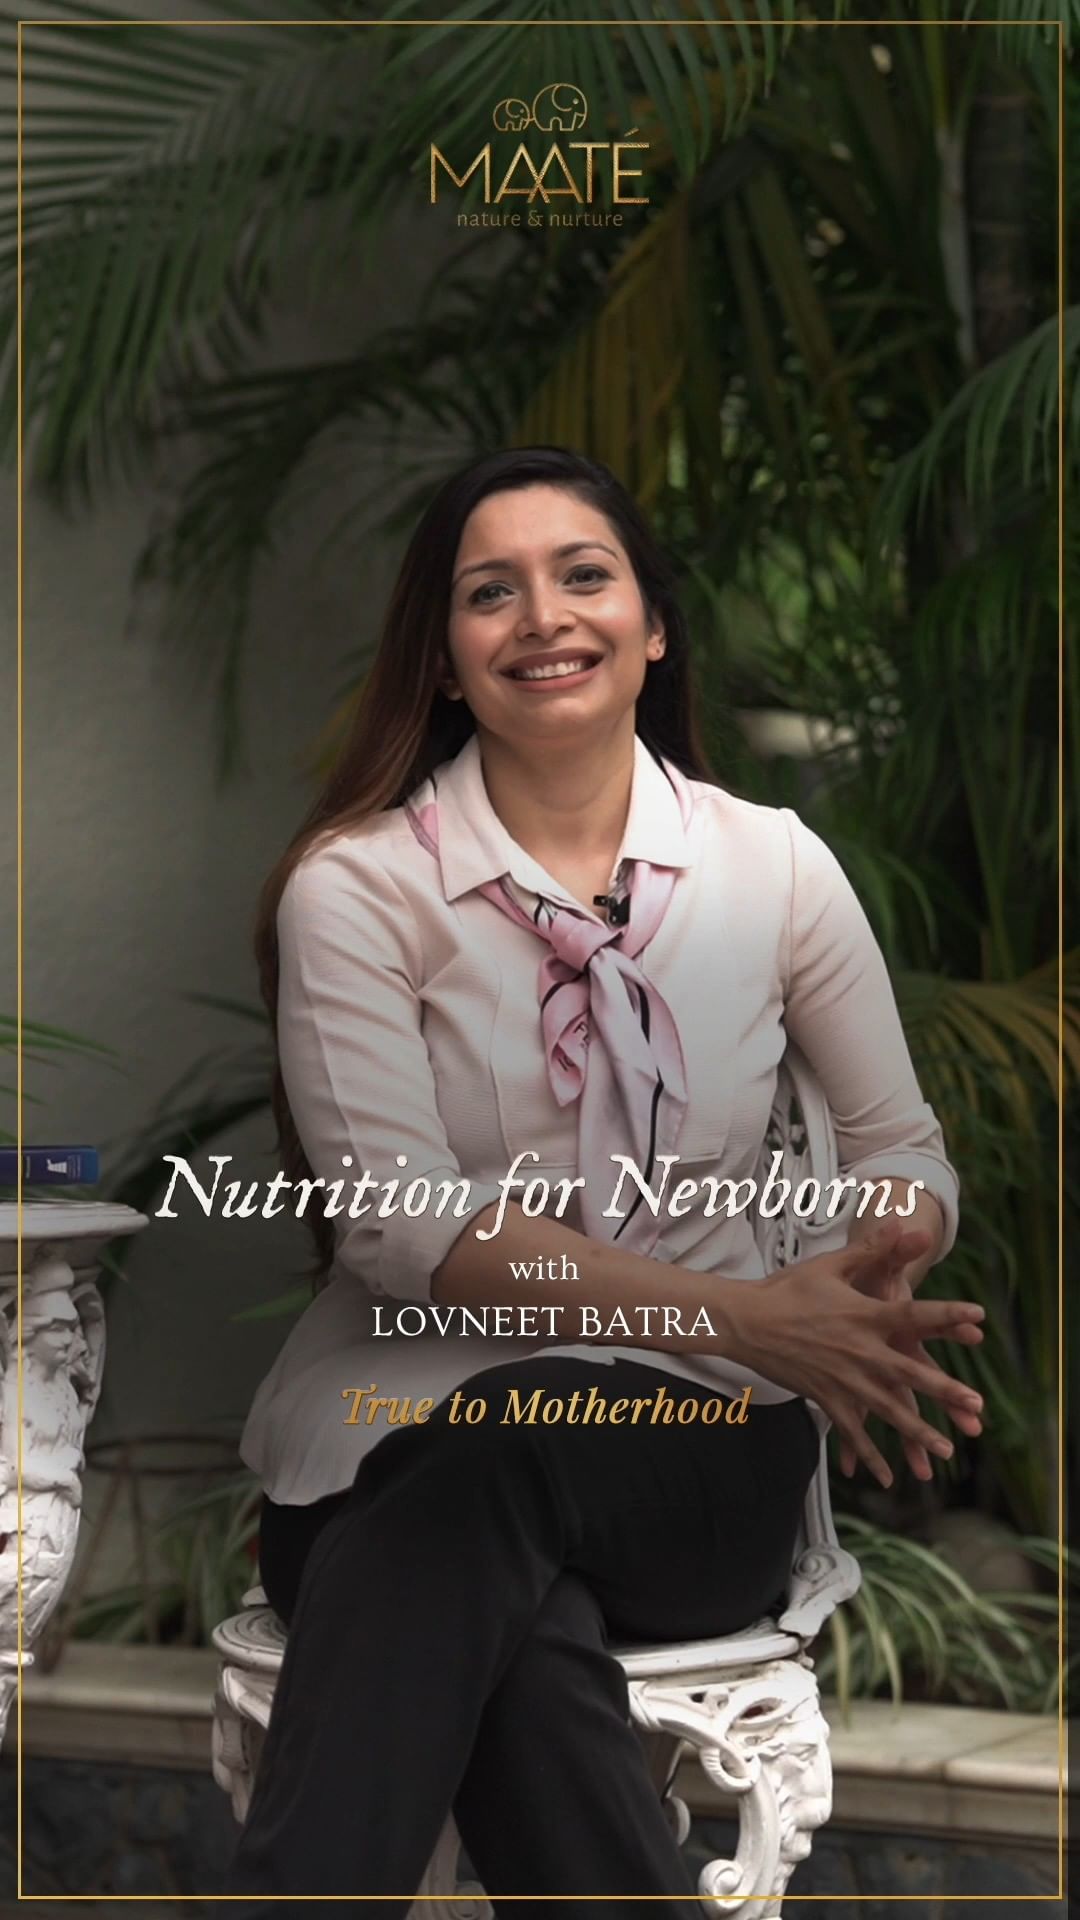 MAATÉ - Clinical Nutritionist, Lovneet Batra @lovneetb talks about Nutrition for Newborns.

Nutritional needs of a newborn differ from full grown kids, but they still do need all essential nutrients...